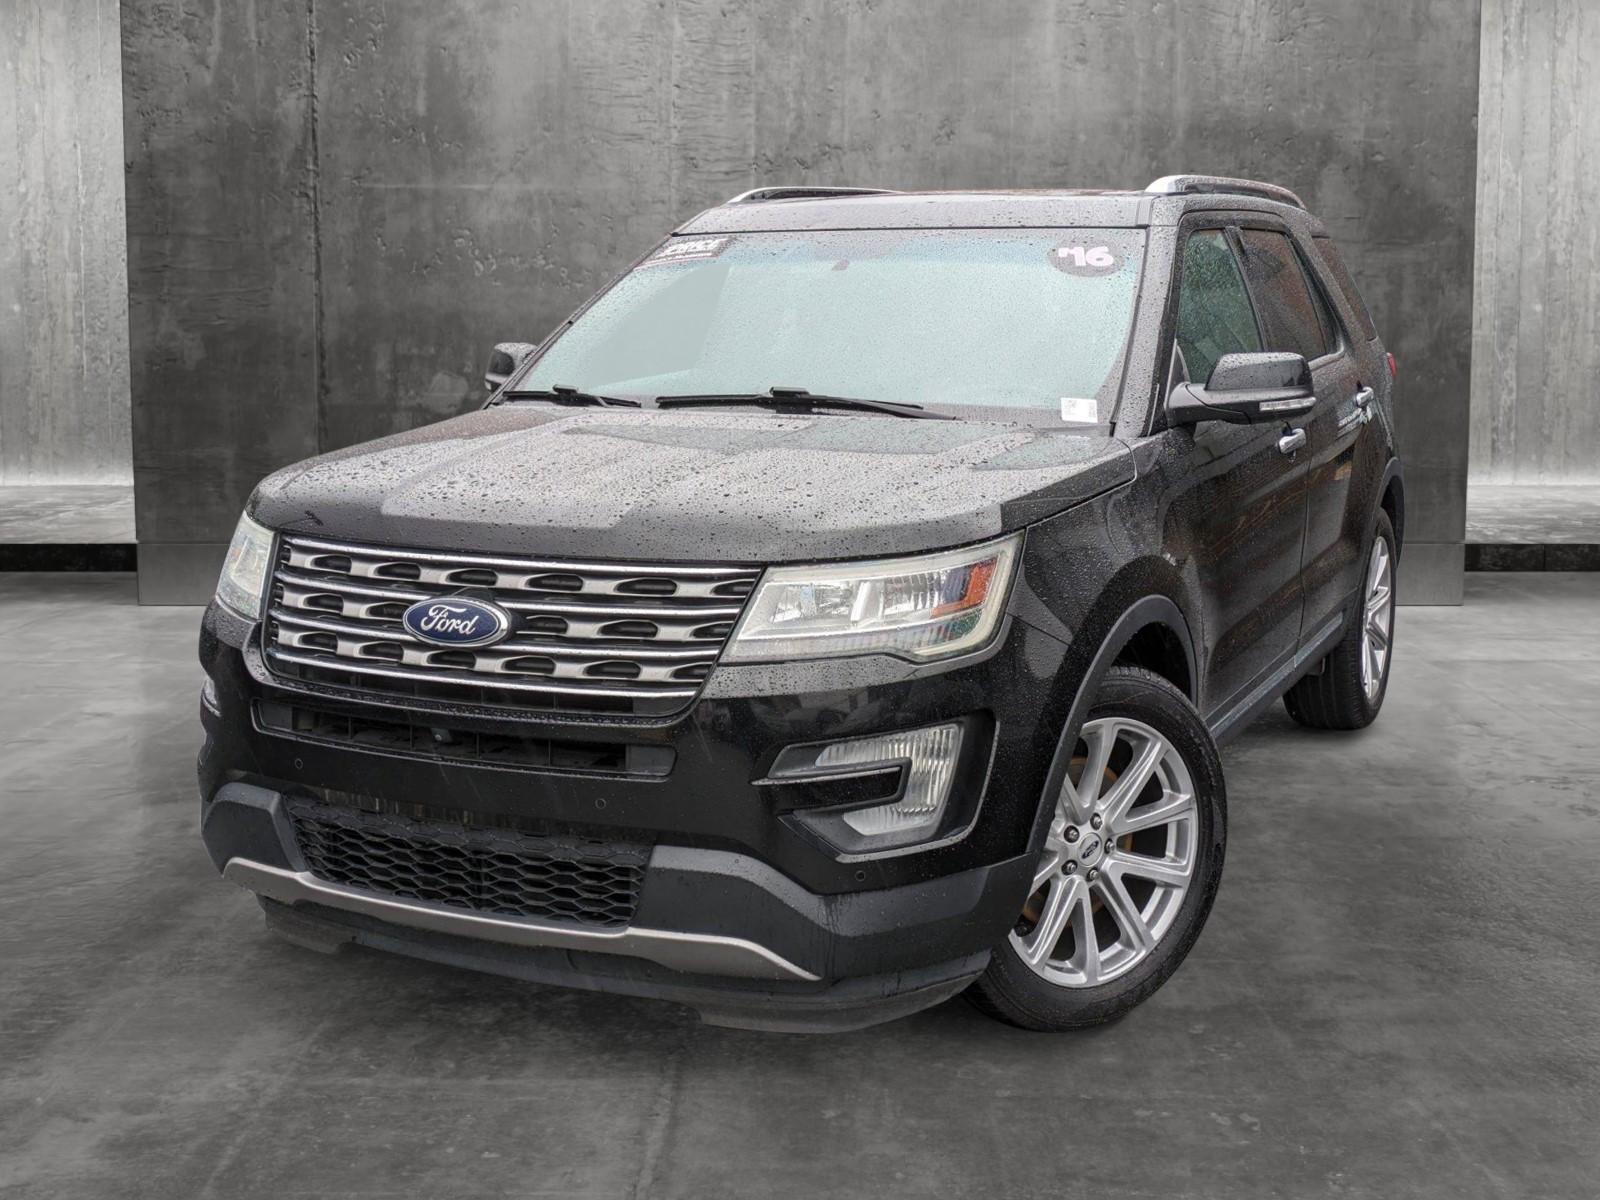 2016 Ford Explorer Vehicle Photo in Bethesda, MD 20852